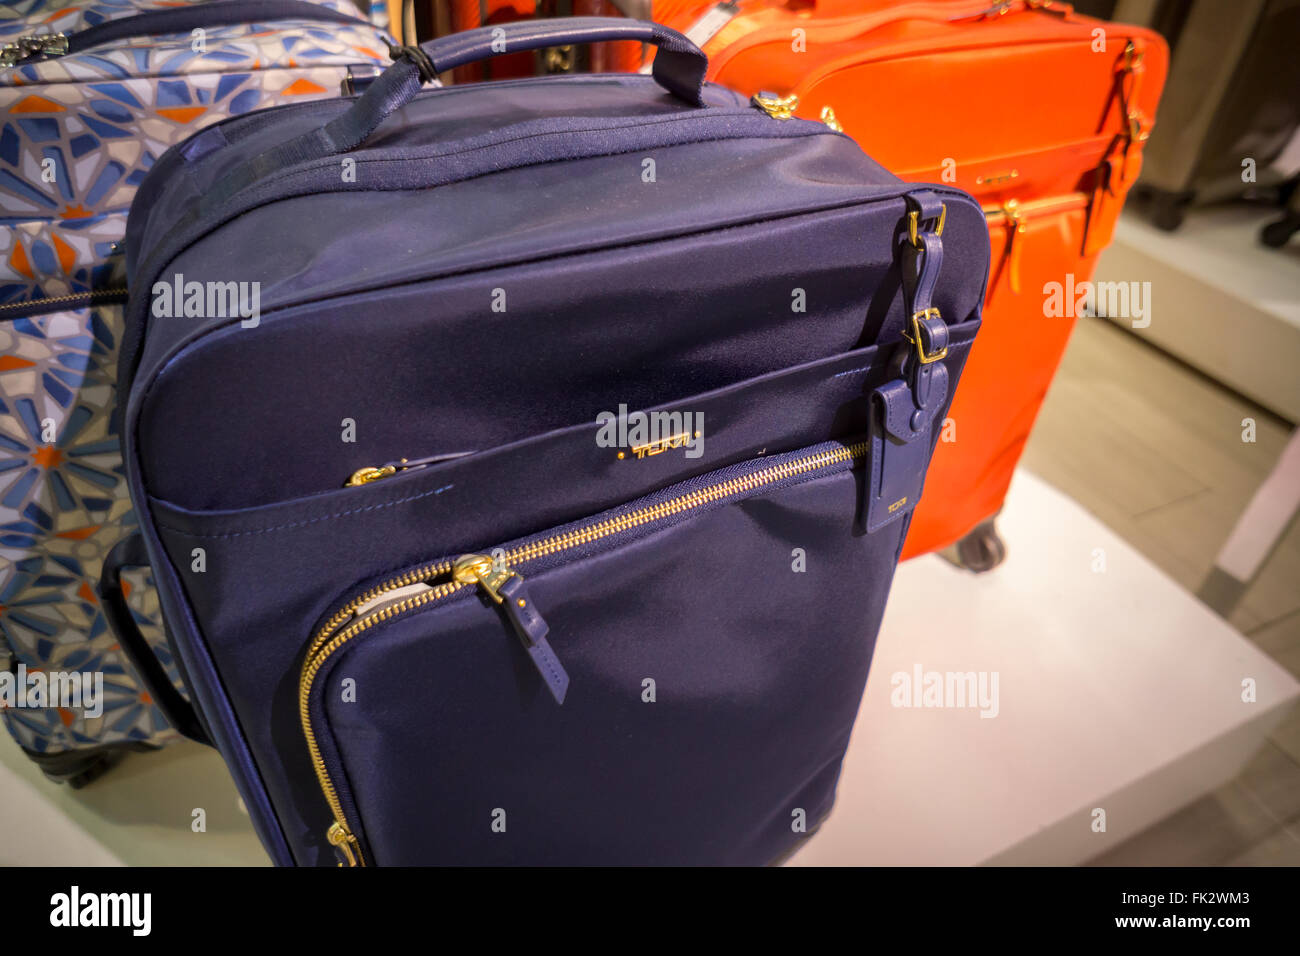 Tumi brand luggage in a Tumi store in New York on Friday, March 4, 2016.  Samsonite announced that it has agreed to buy competitor Tumi in a deal  worth approximately $1.8 billion.